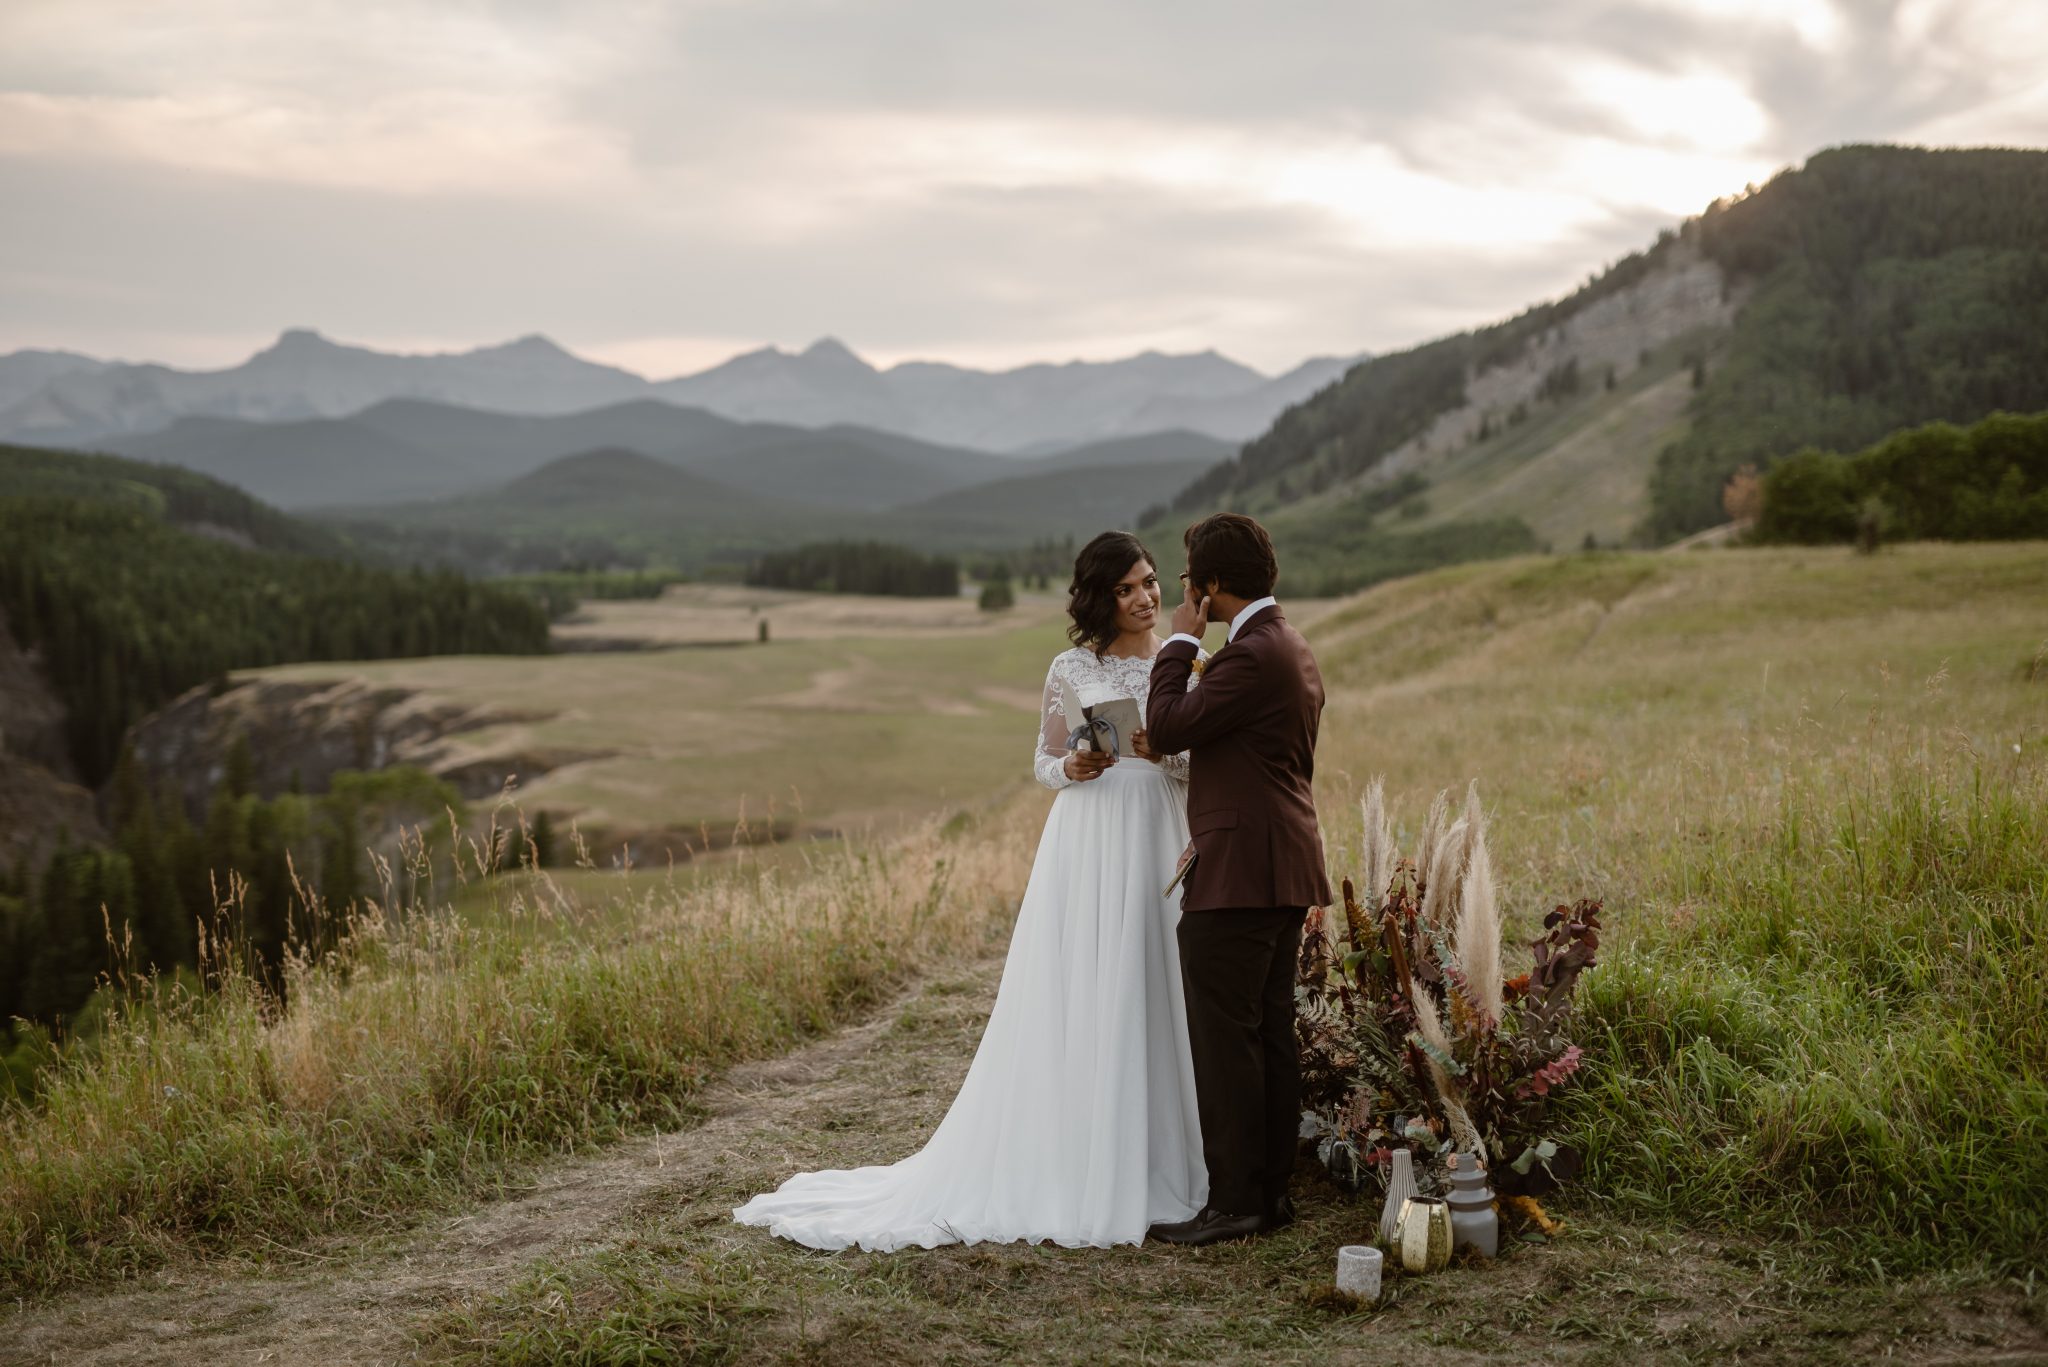 Earthy and Eclectic Moroccan Elopement at Big Horn Lookout featured on Brontë Bride - alberta elopement, elopement inspiration, eclectic wedding